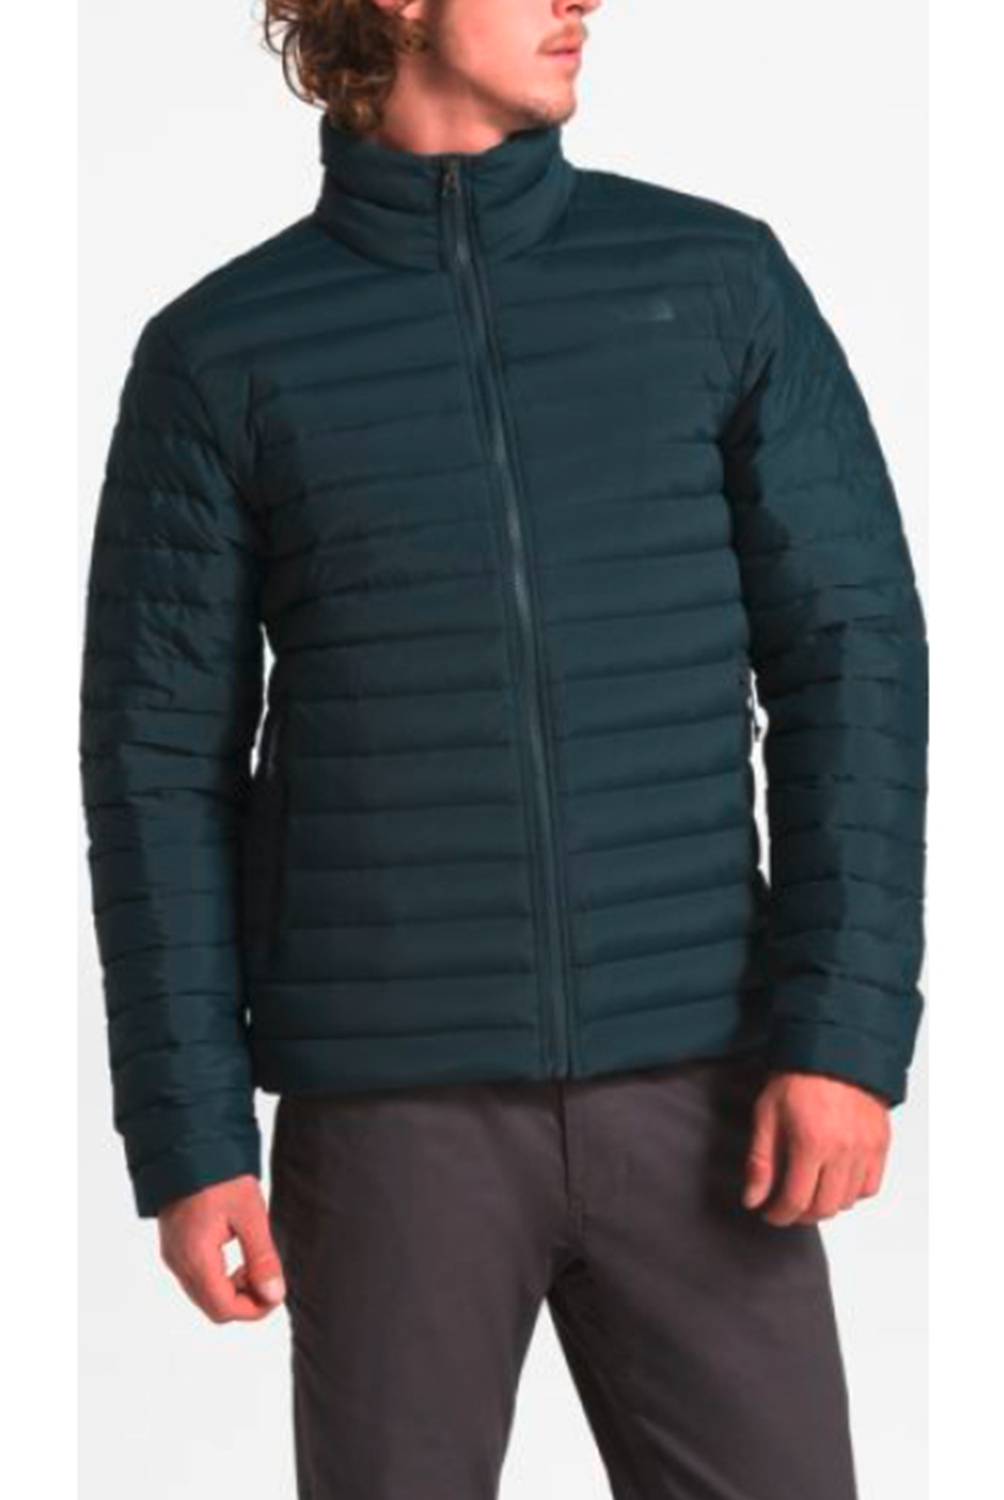 THE NORTH FACE - Parka Deportiva Stretch Down Hombre